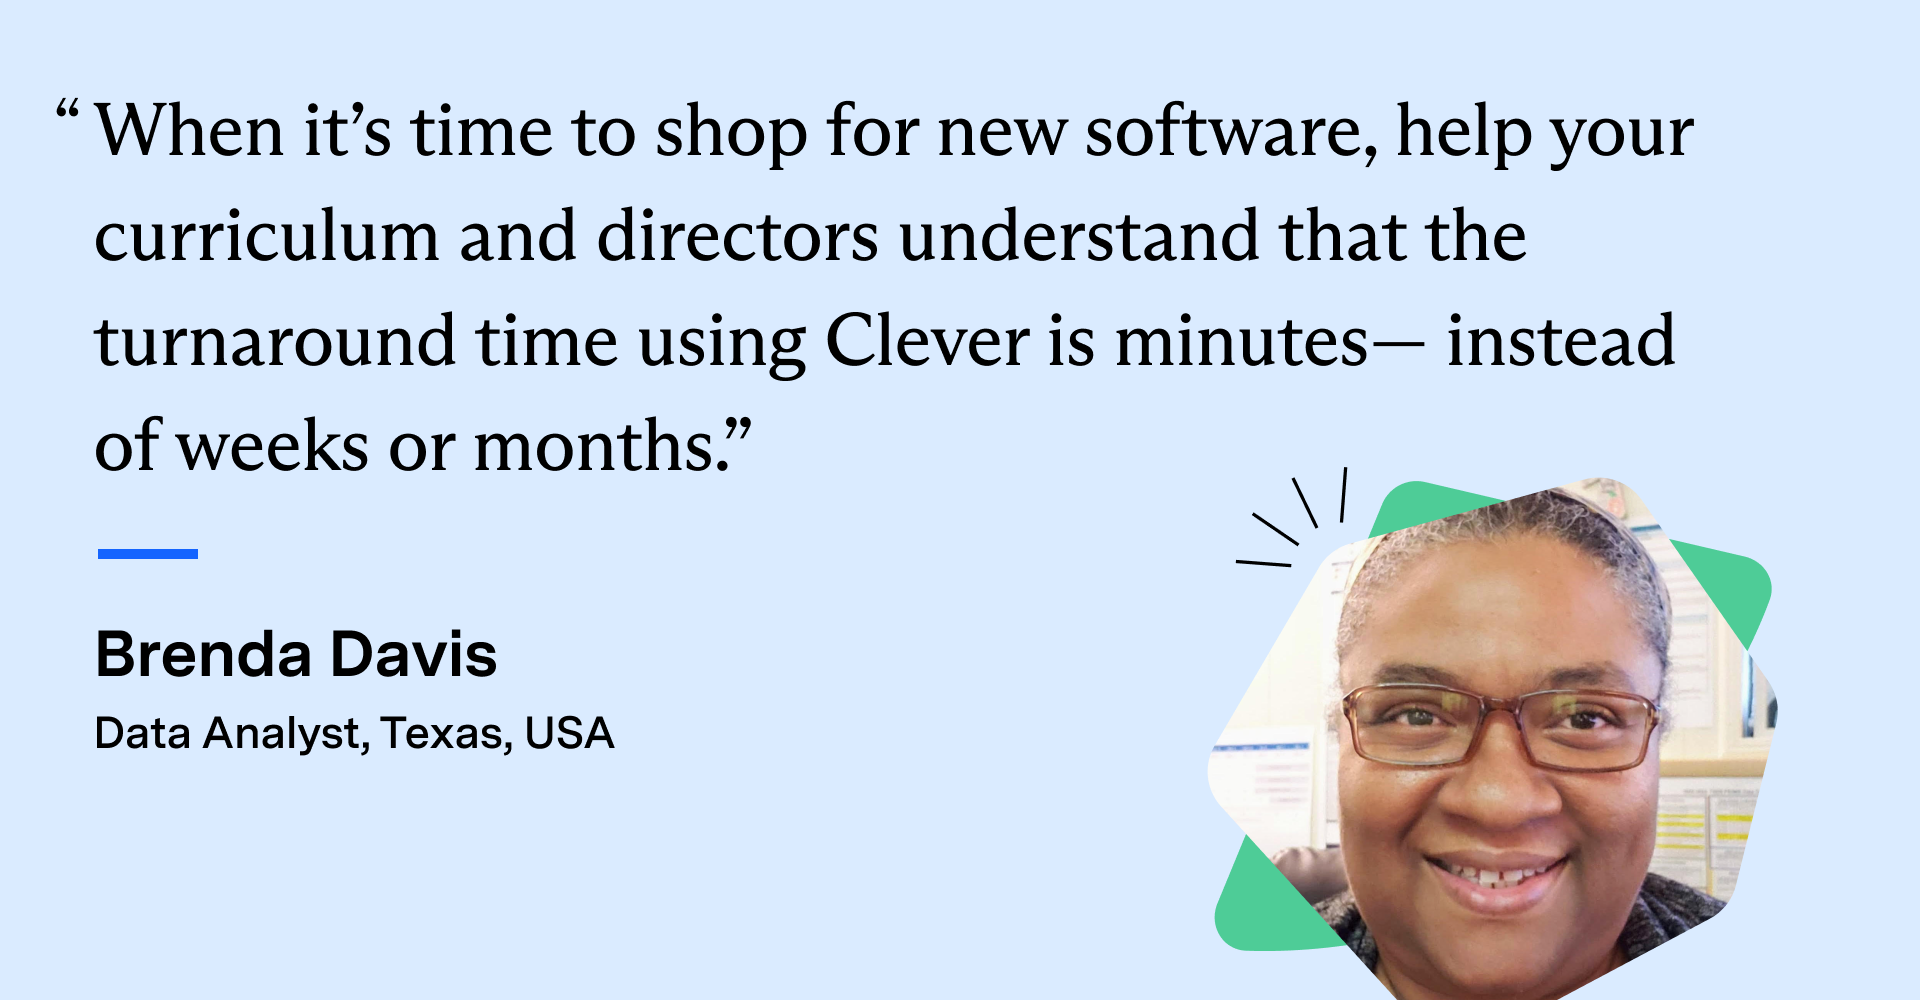 Brenda Davis, Data Analyst from Texas, USA, with the quote: "When it’s time to shop for new software, help your curriculum and directors understand that the turnaround time using Clever is minutes— instead of weeks or months.” 